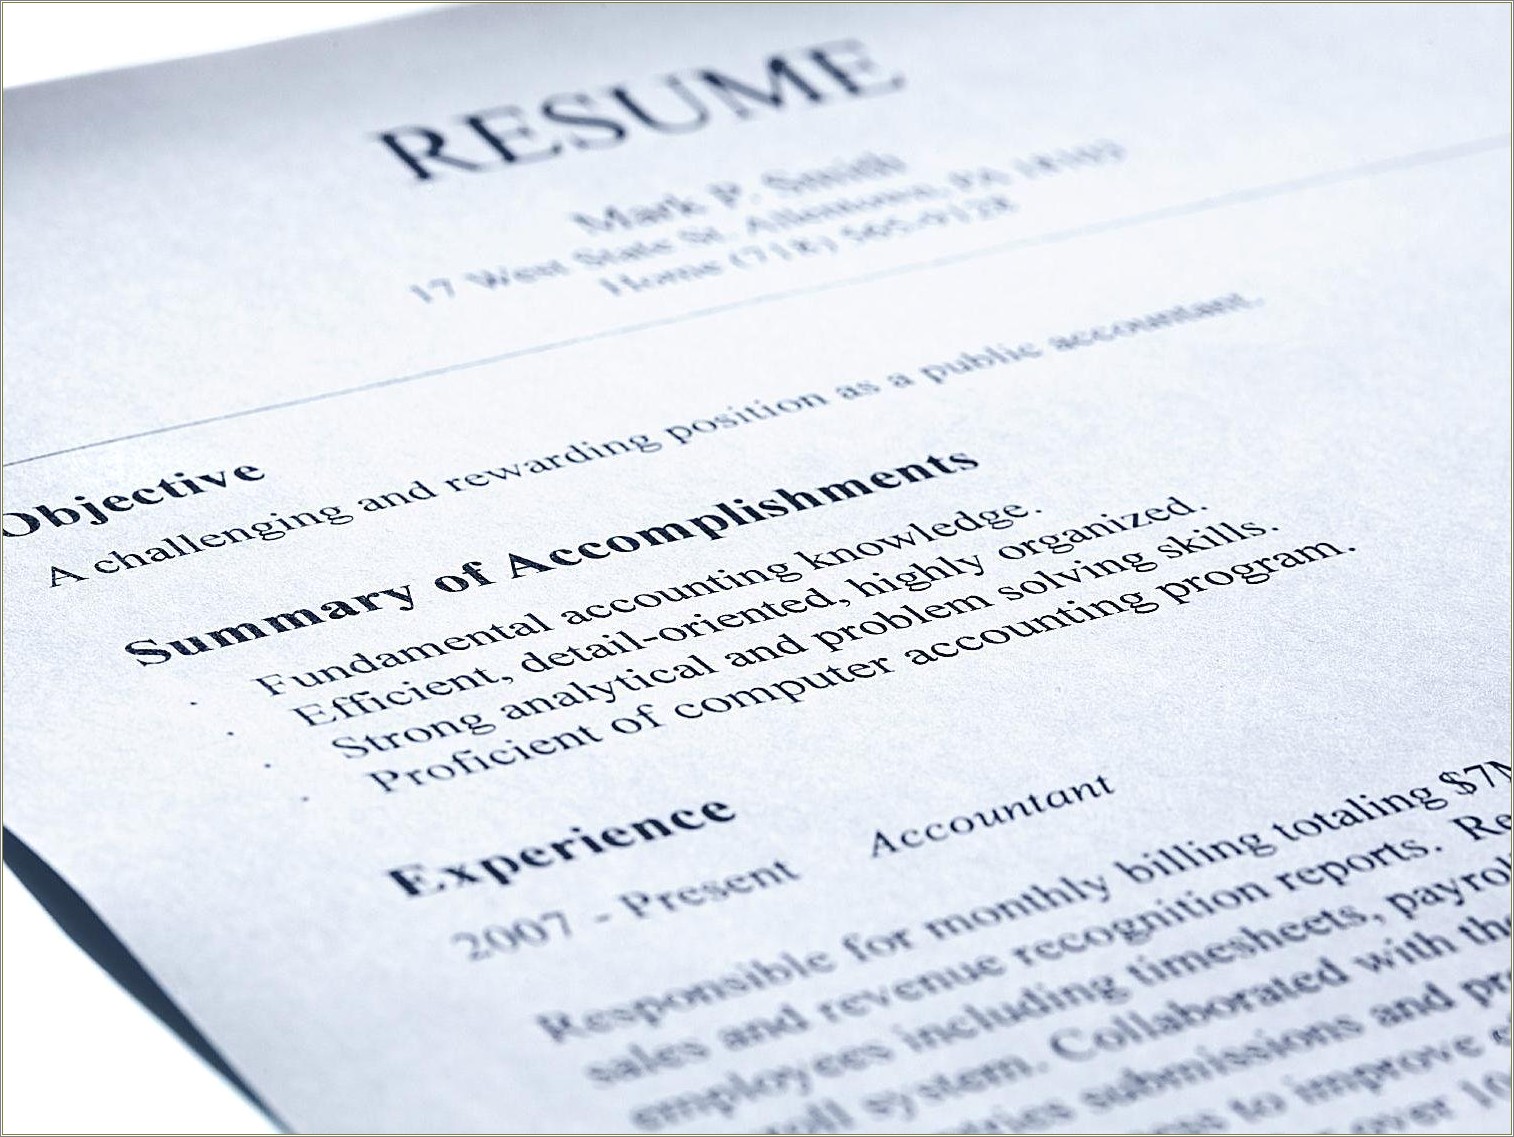 Best Personal Statement Examples For Resume